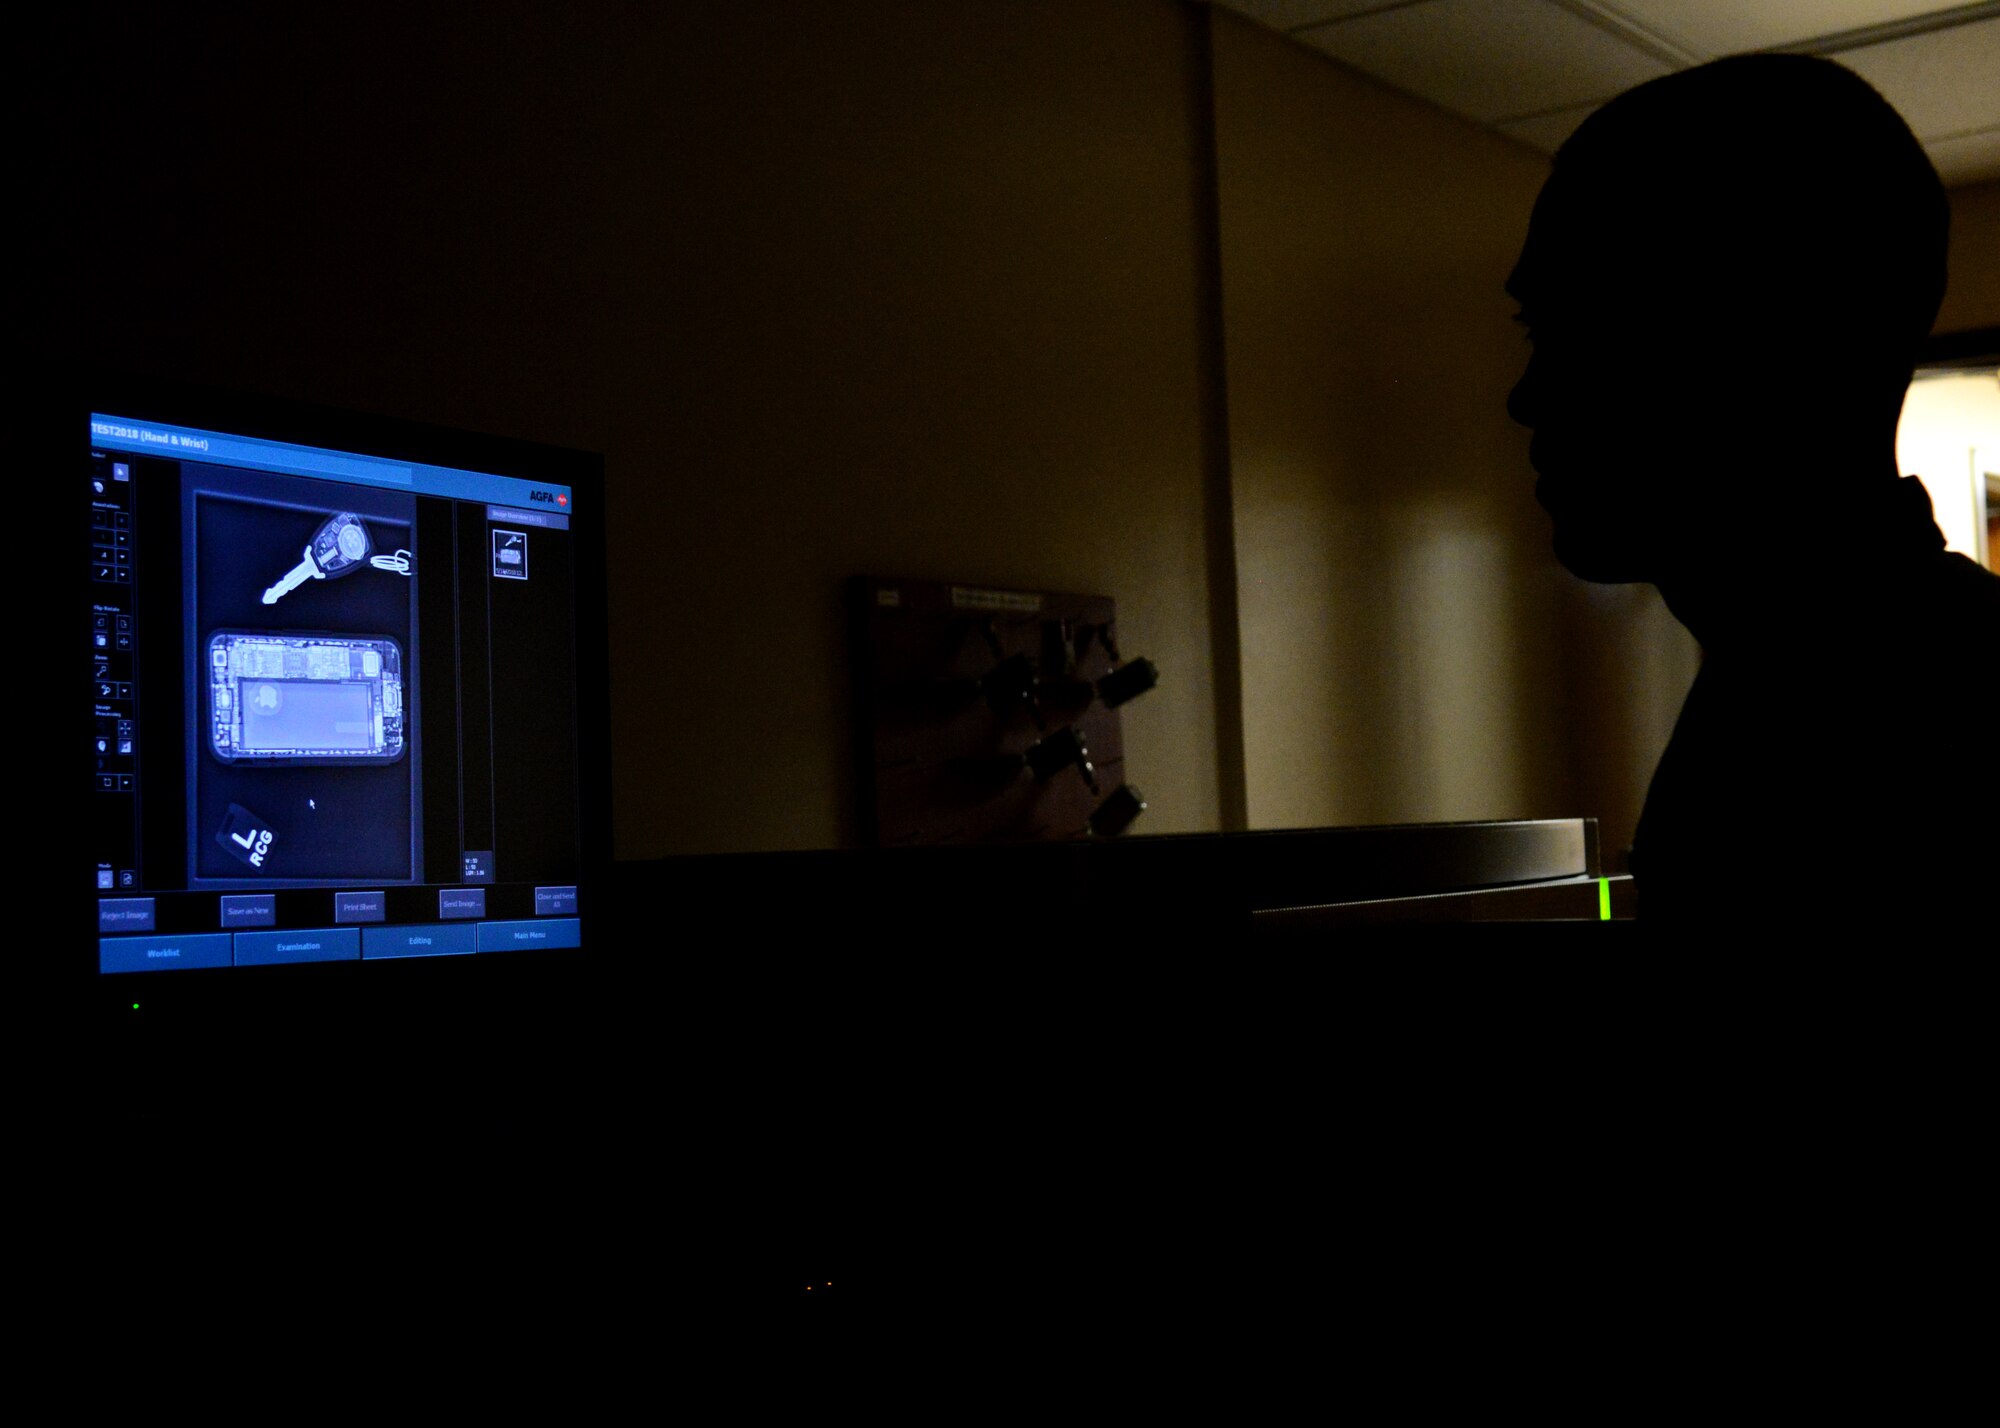 Staff Sgt. Ryan Gulland, a 28th Medical Support Squadron diagnostic imaging technician, looks over a test image on the image processor inside the 28th Medical Group at Ellsworth Air Force Base, S.D., May 11, 2018. Once an image is captured, a cassette is placed in the processor and the image generates on screen for review. (U.S. Air Force photo by Senior Airman Denise Jenson)